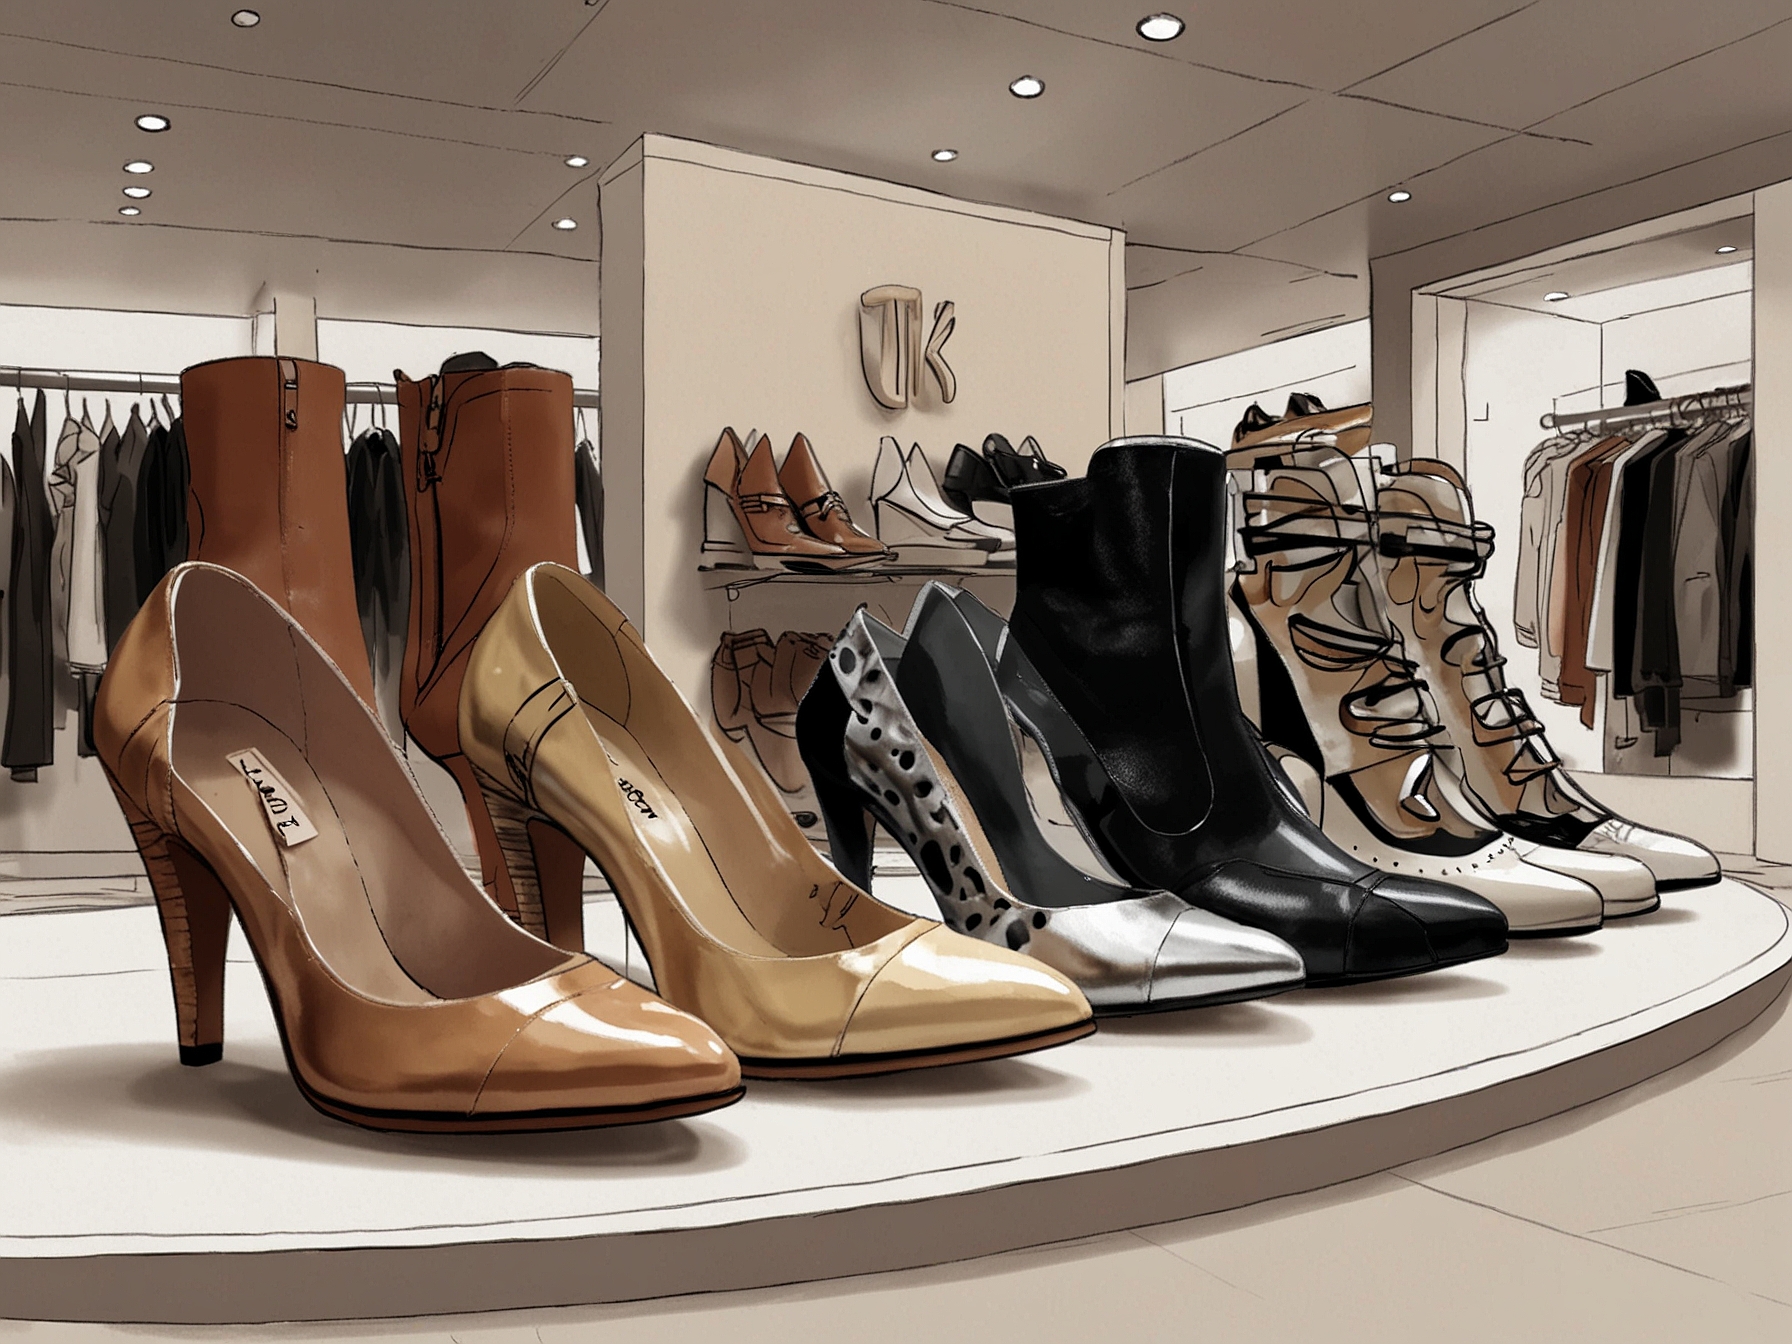 A display of chic designer shoes at TK Maxx, including casual sneakers, elegant heels, and statement boots, showcasing the variety and style available at unbeatable prices.